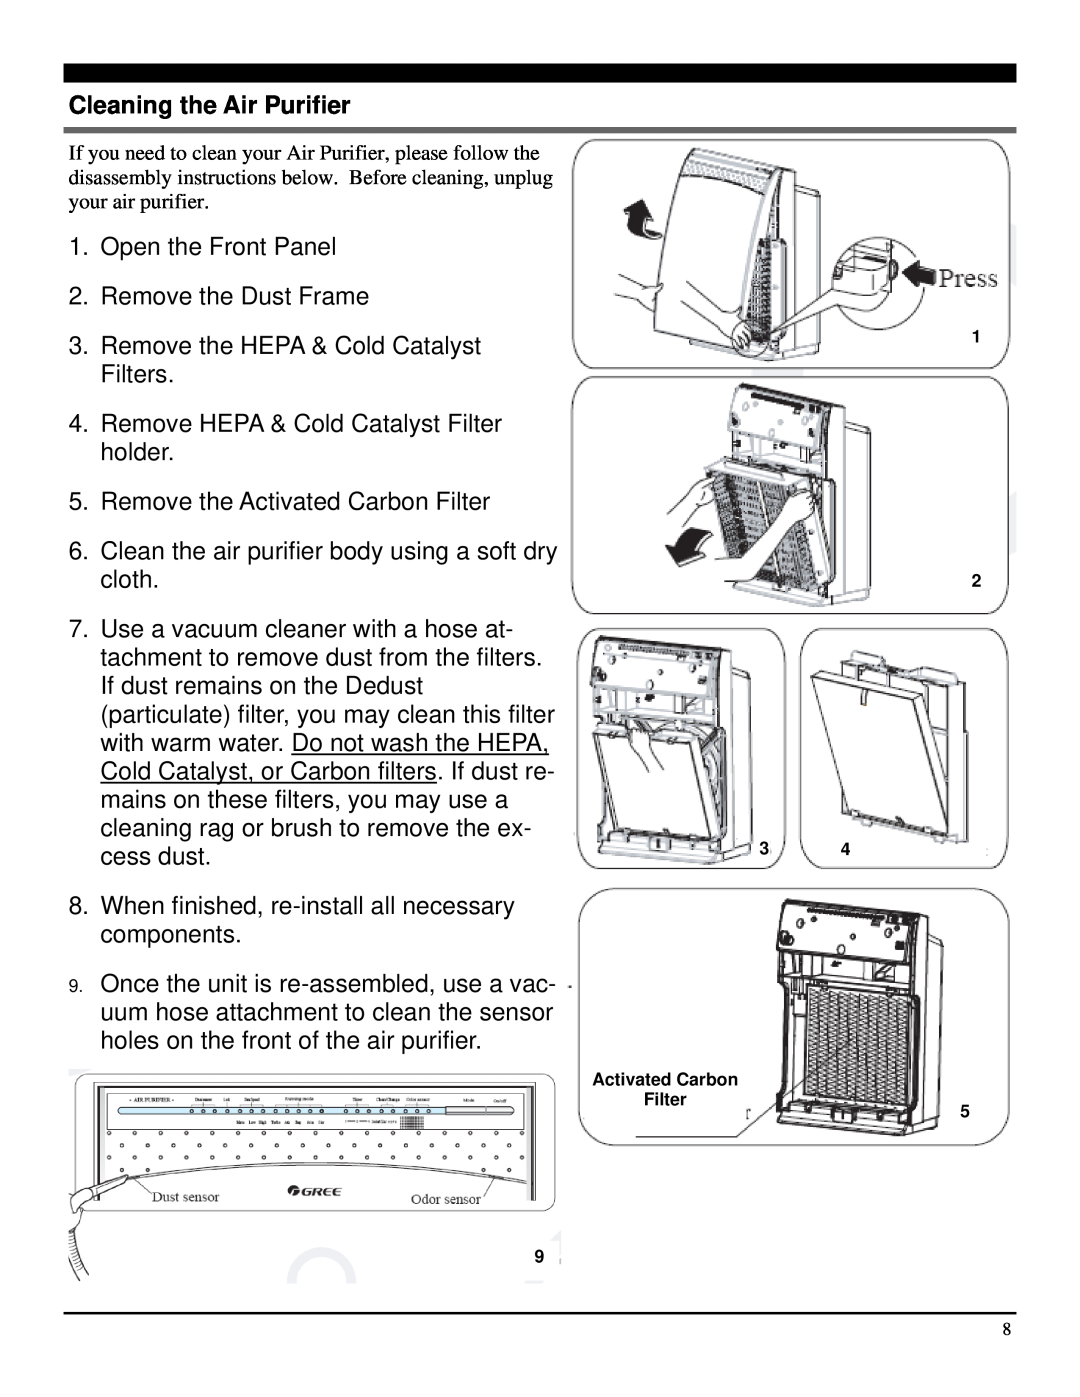 Soleus Air AH1-CC-01 operating instructions Cleaning the Air Purifier 